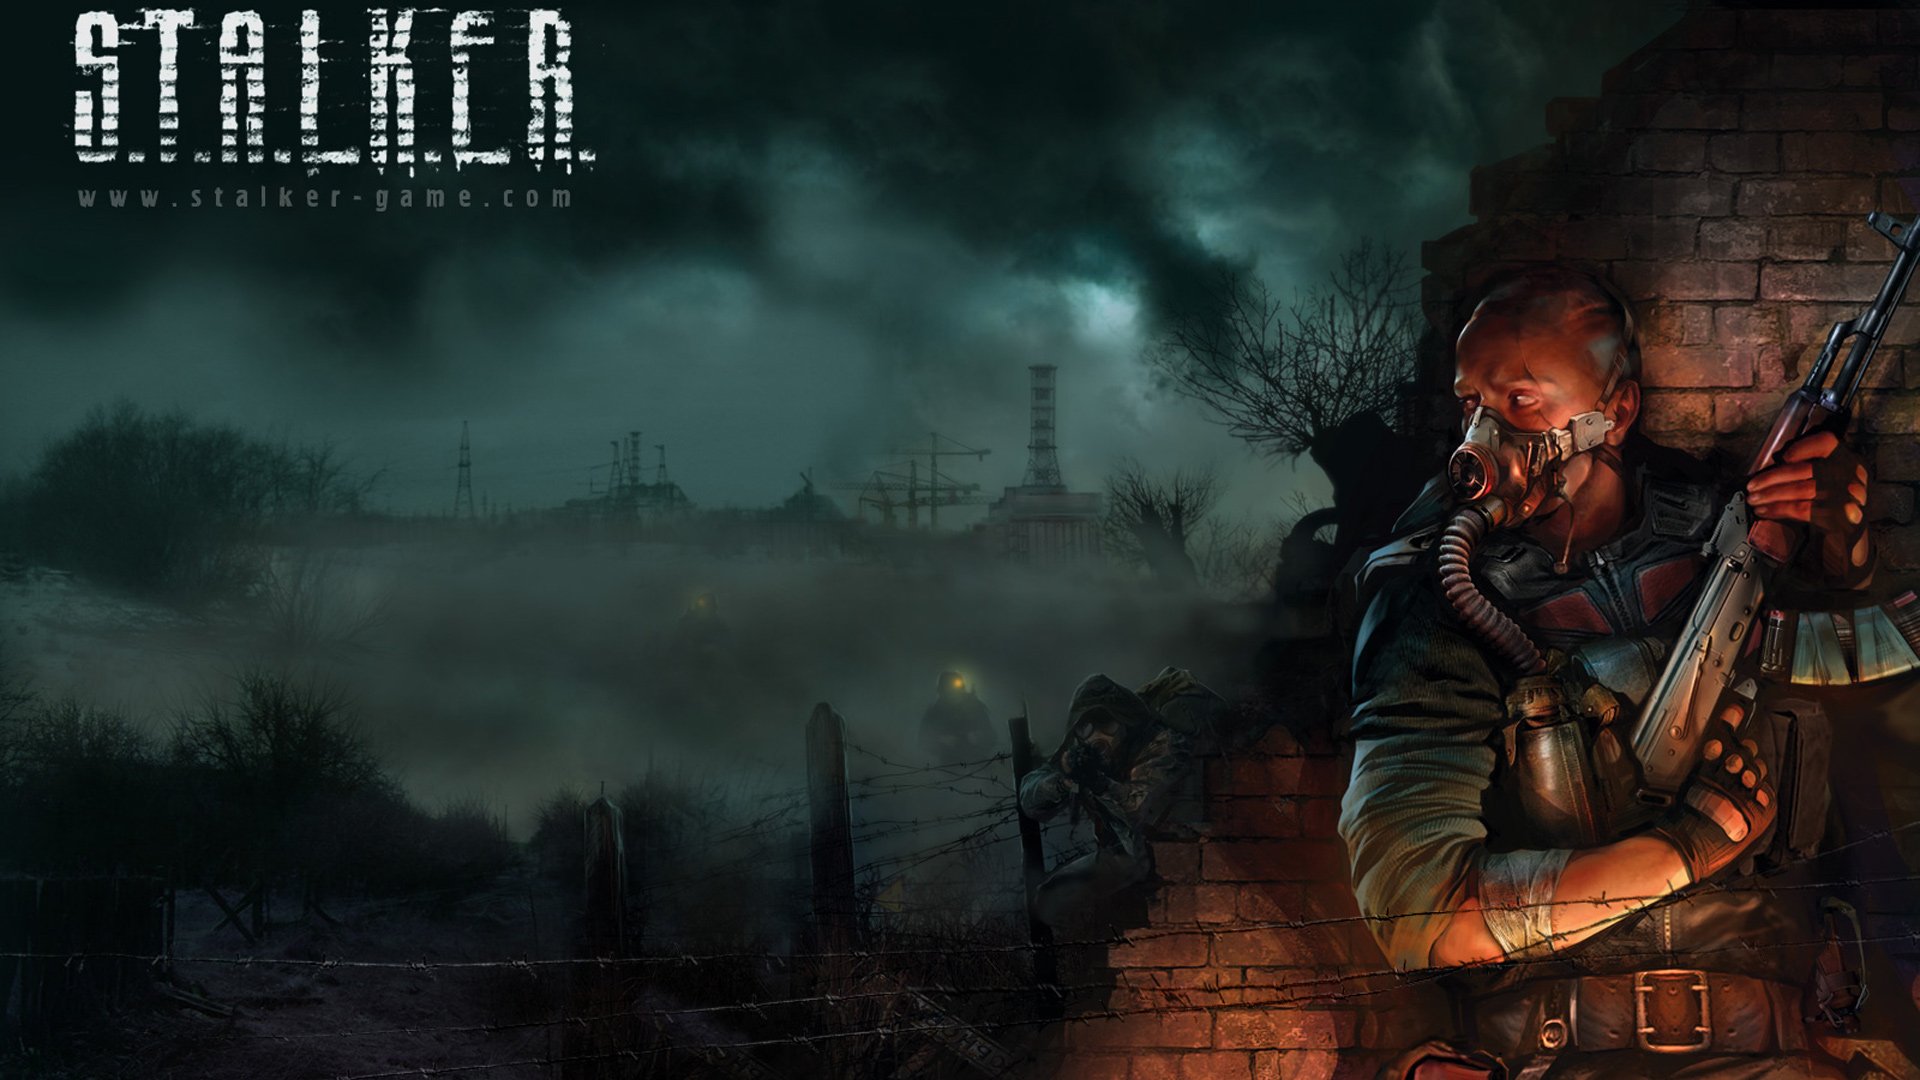 download the new version for iphoneS.T.A.L.K.E.R. 2: Heart of Chernobyl